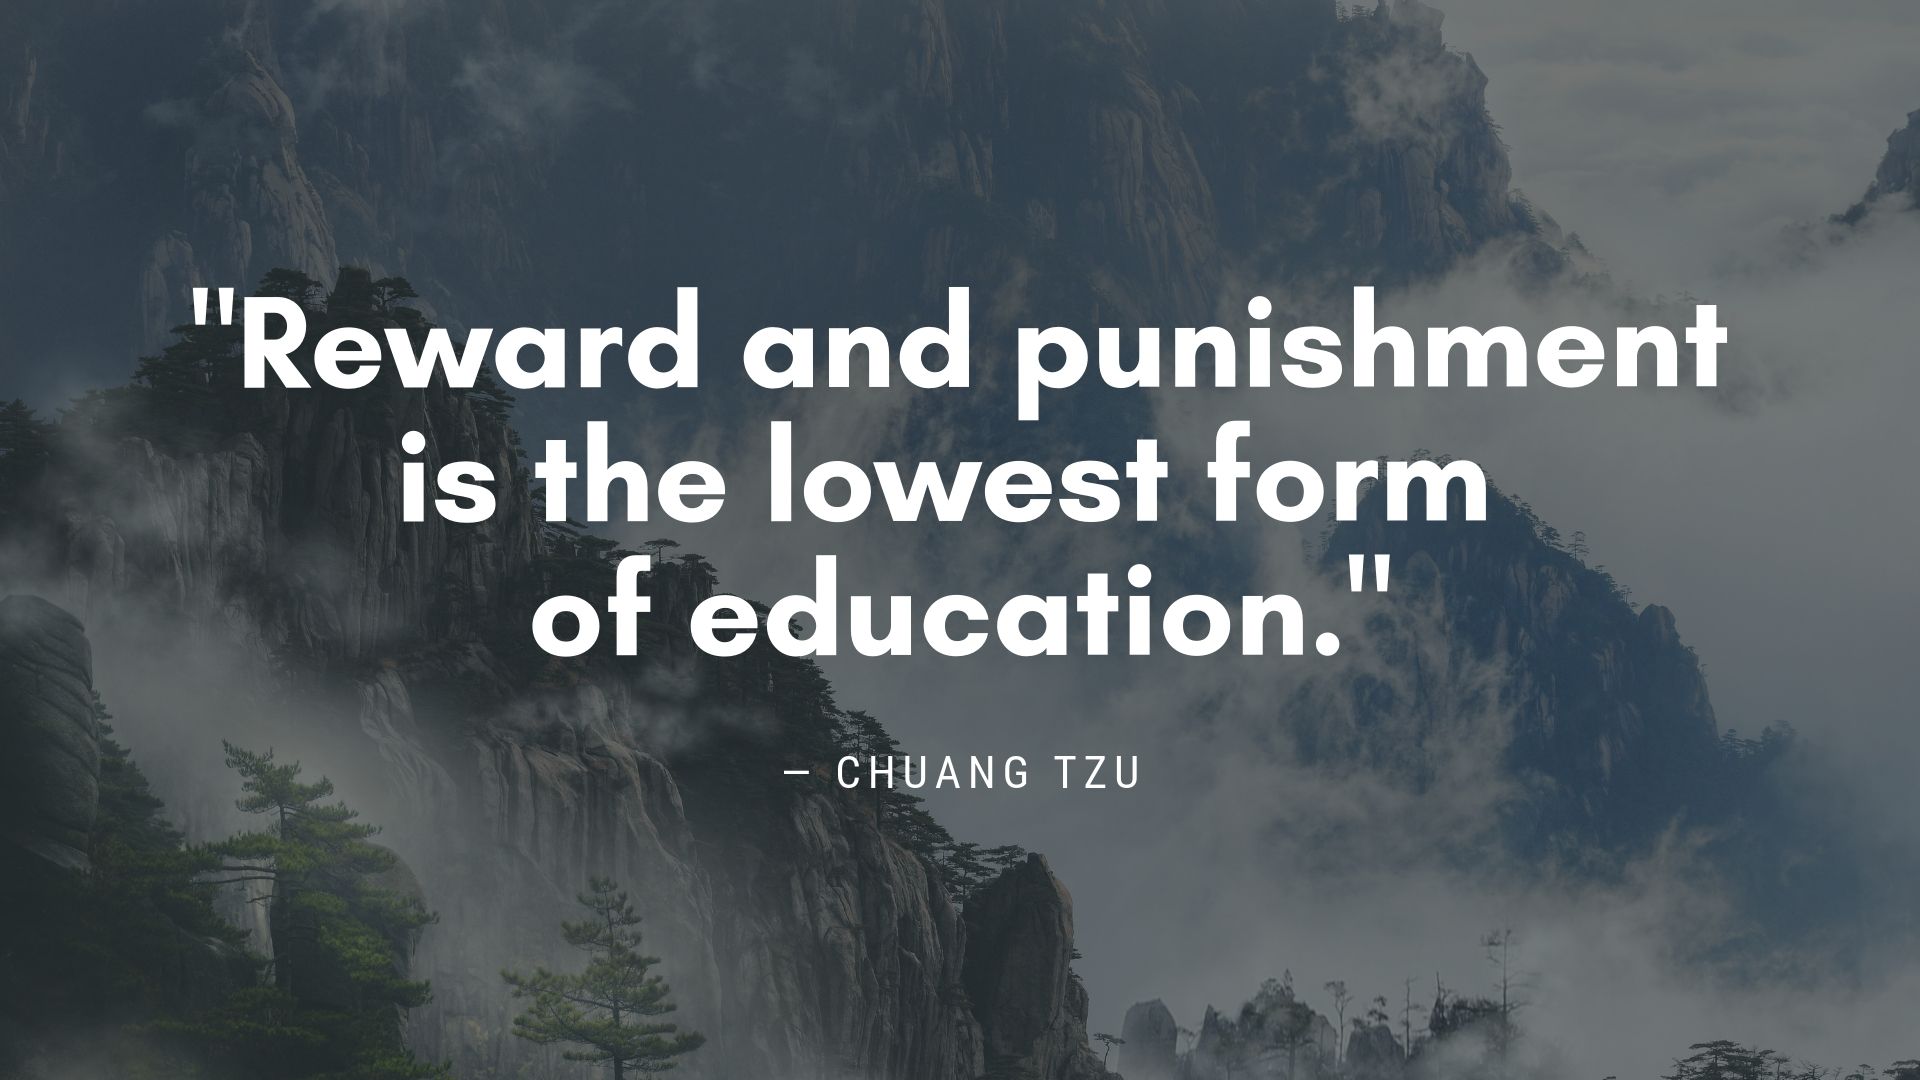 "Reward and punishment is the lowest form of education." ― Chuang Tzu